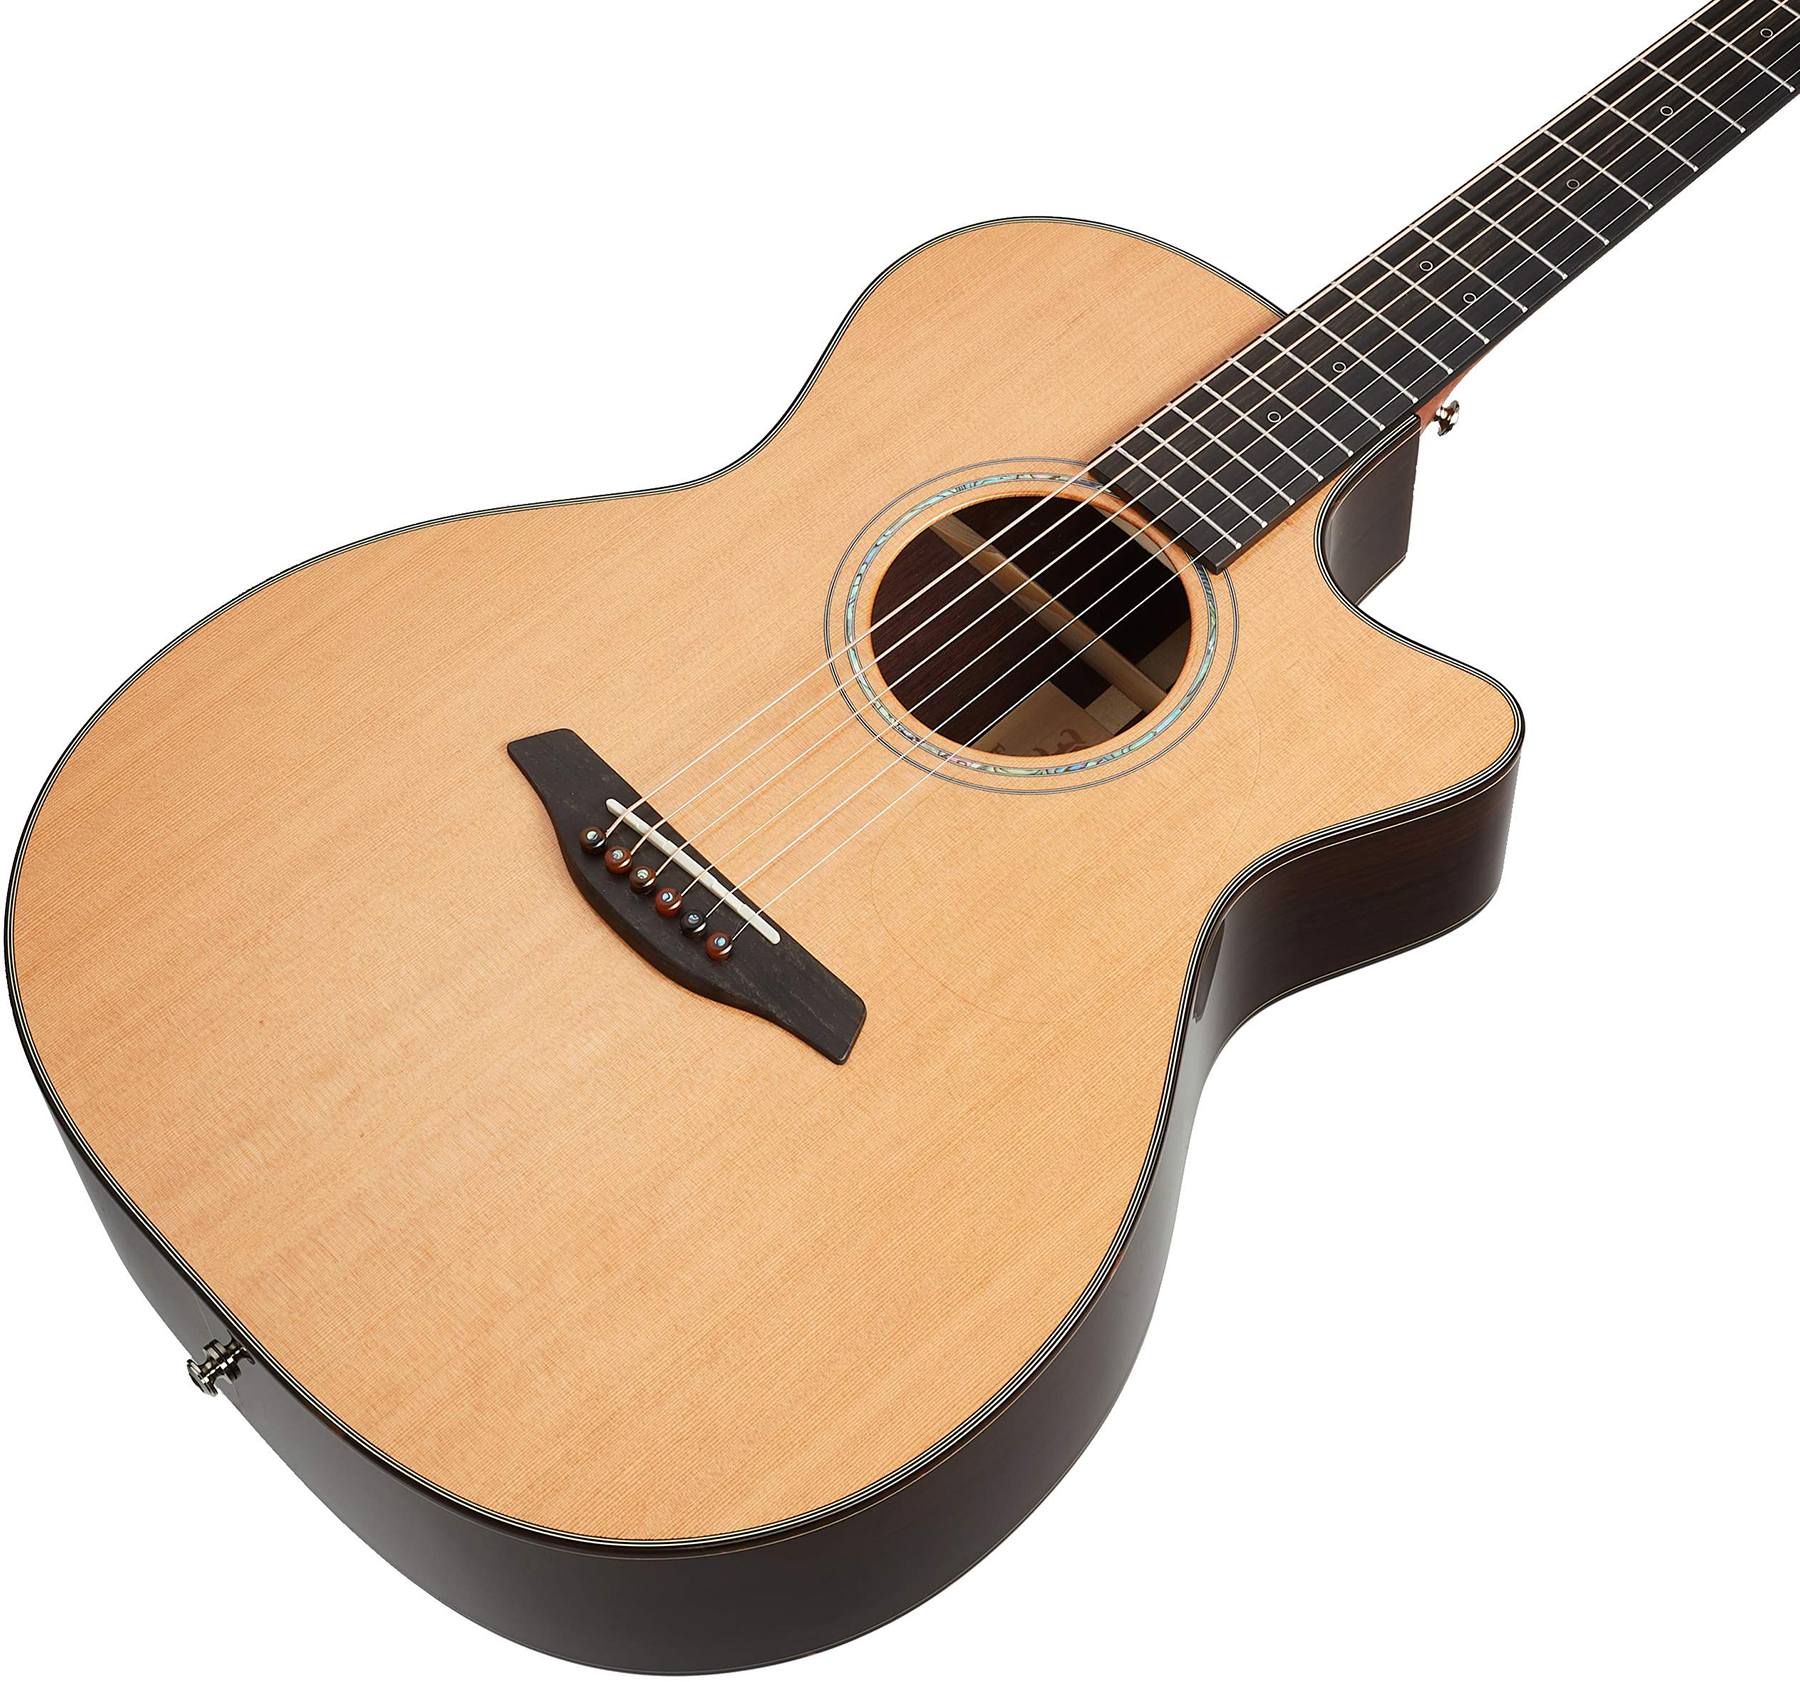 Furch Omc-cr Lrb1 Yellow Orchestra Model Cw Cedre Palissandre Eb - Natural Full-pore - Guitare Electro Acoustique - Variation 2